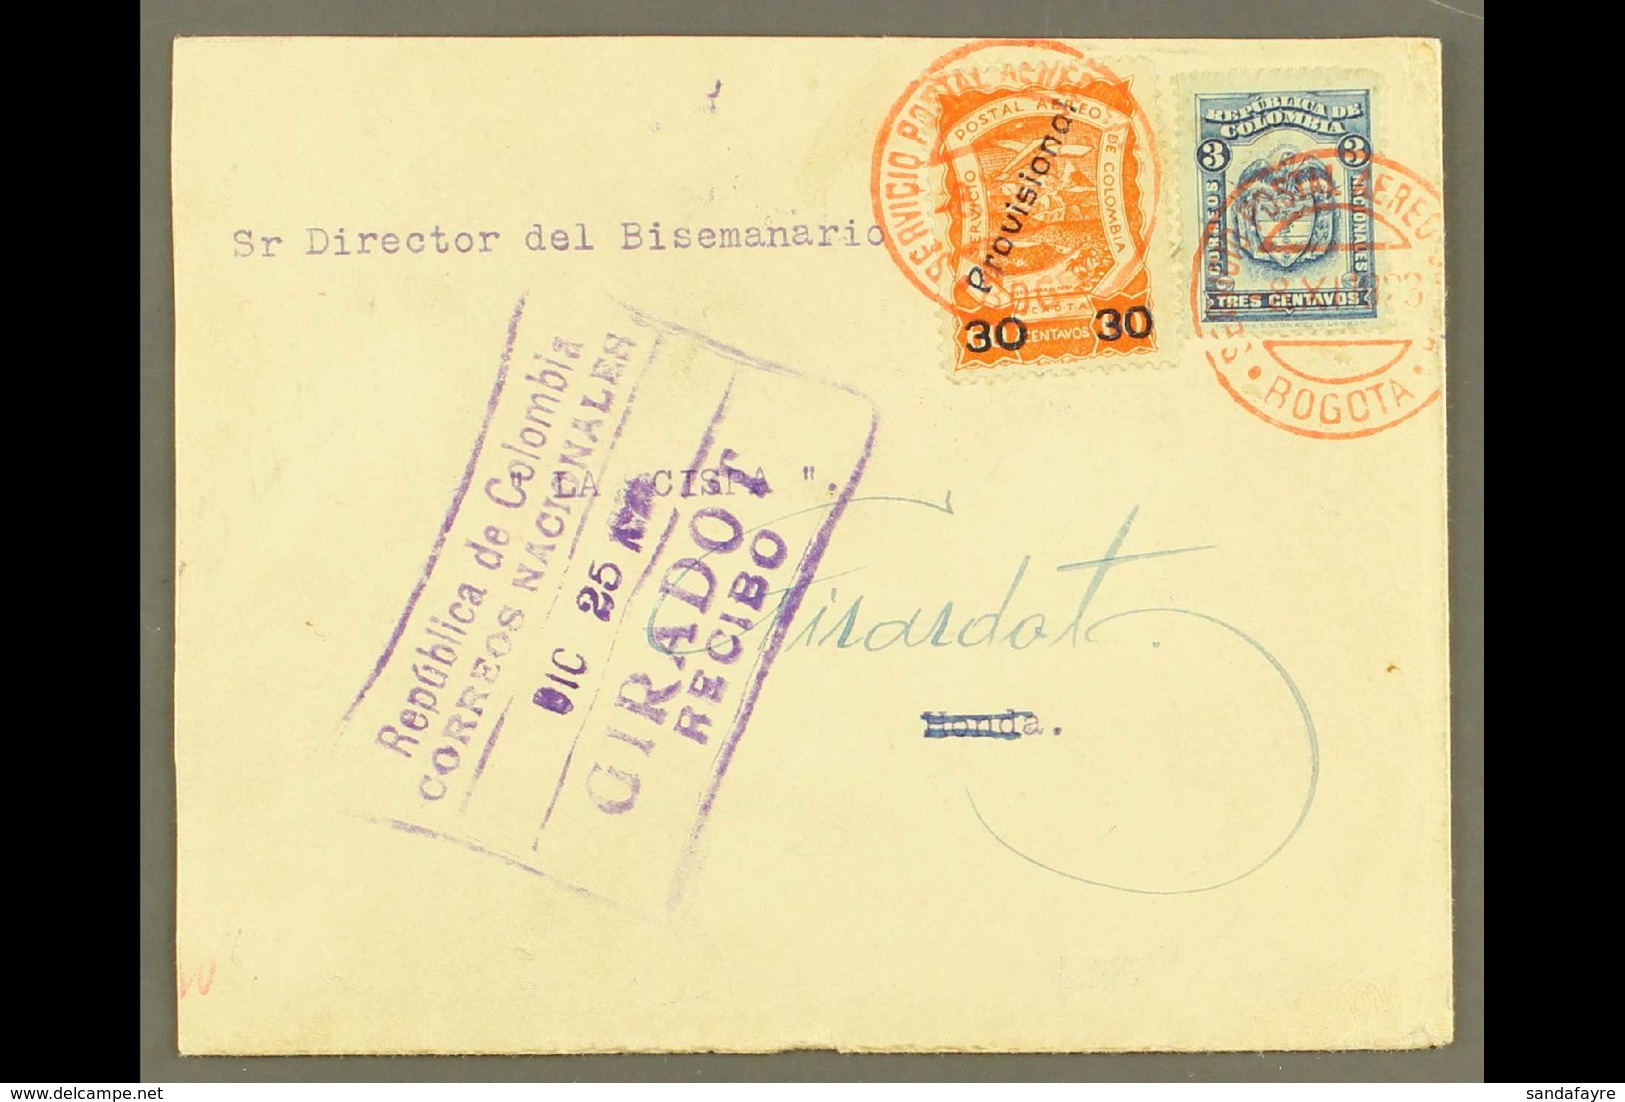 PRIVATE AIR COMPANIES - SCADTA 1923 (Nov/Dec) Cover From Bogota To Honda (reduced At Left) Bearing 1923 30c On 60c Orang - Colombie